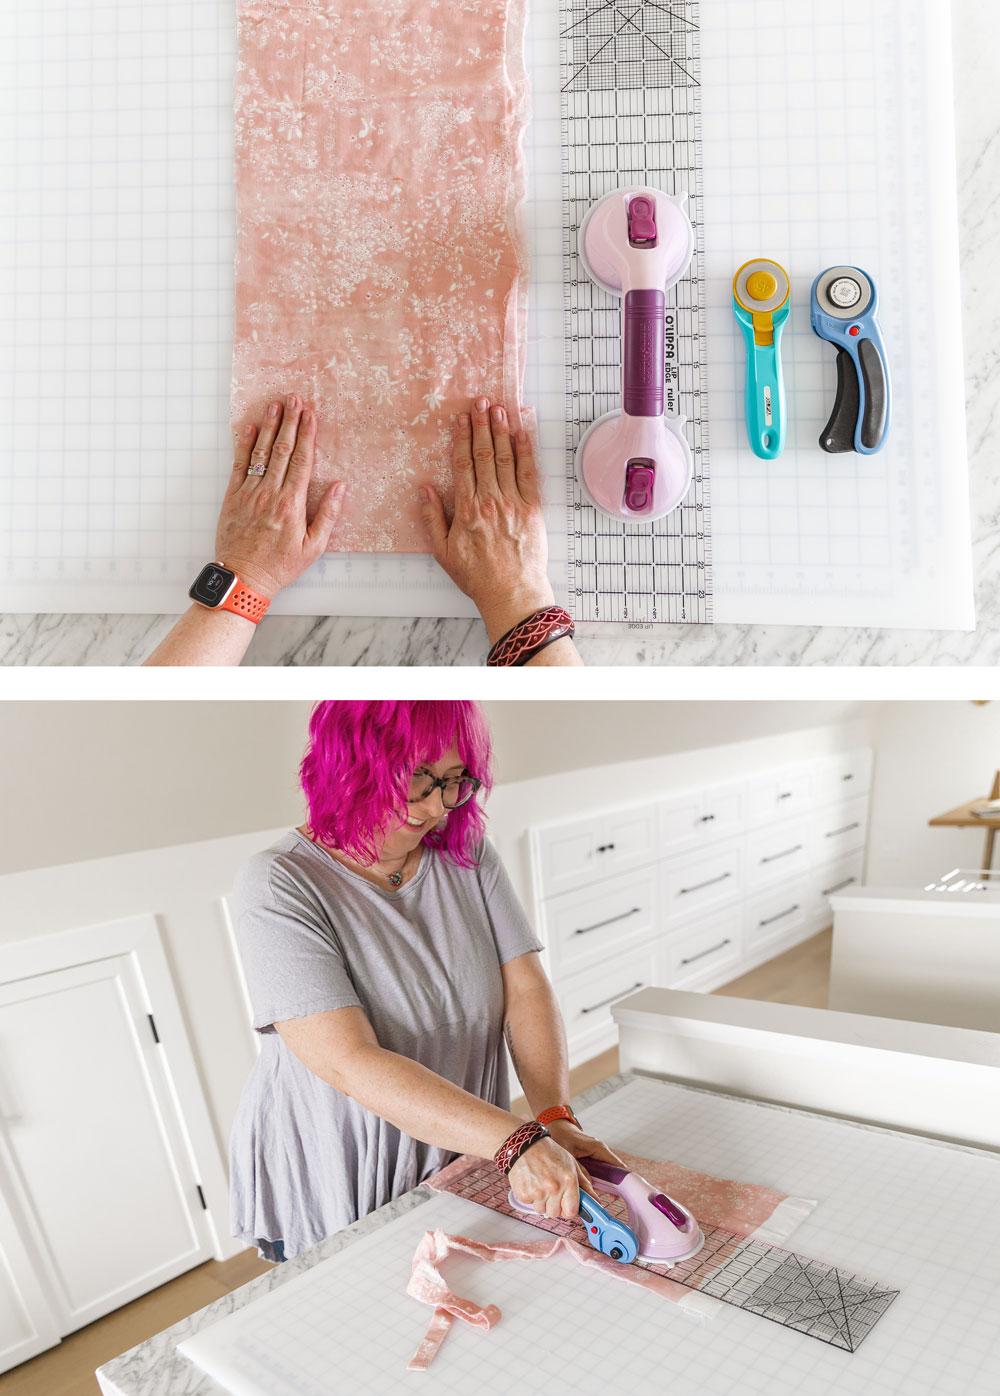 Stay healthy and pain free with these 5 tips for good sewing ergonomics. suzyquilts.com #sewing